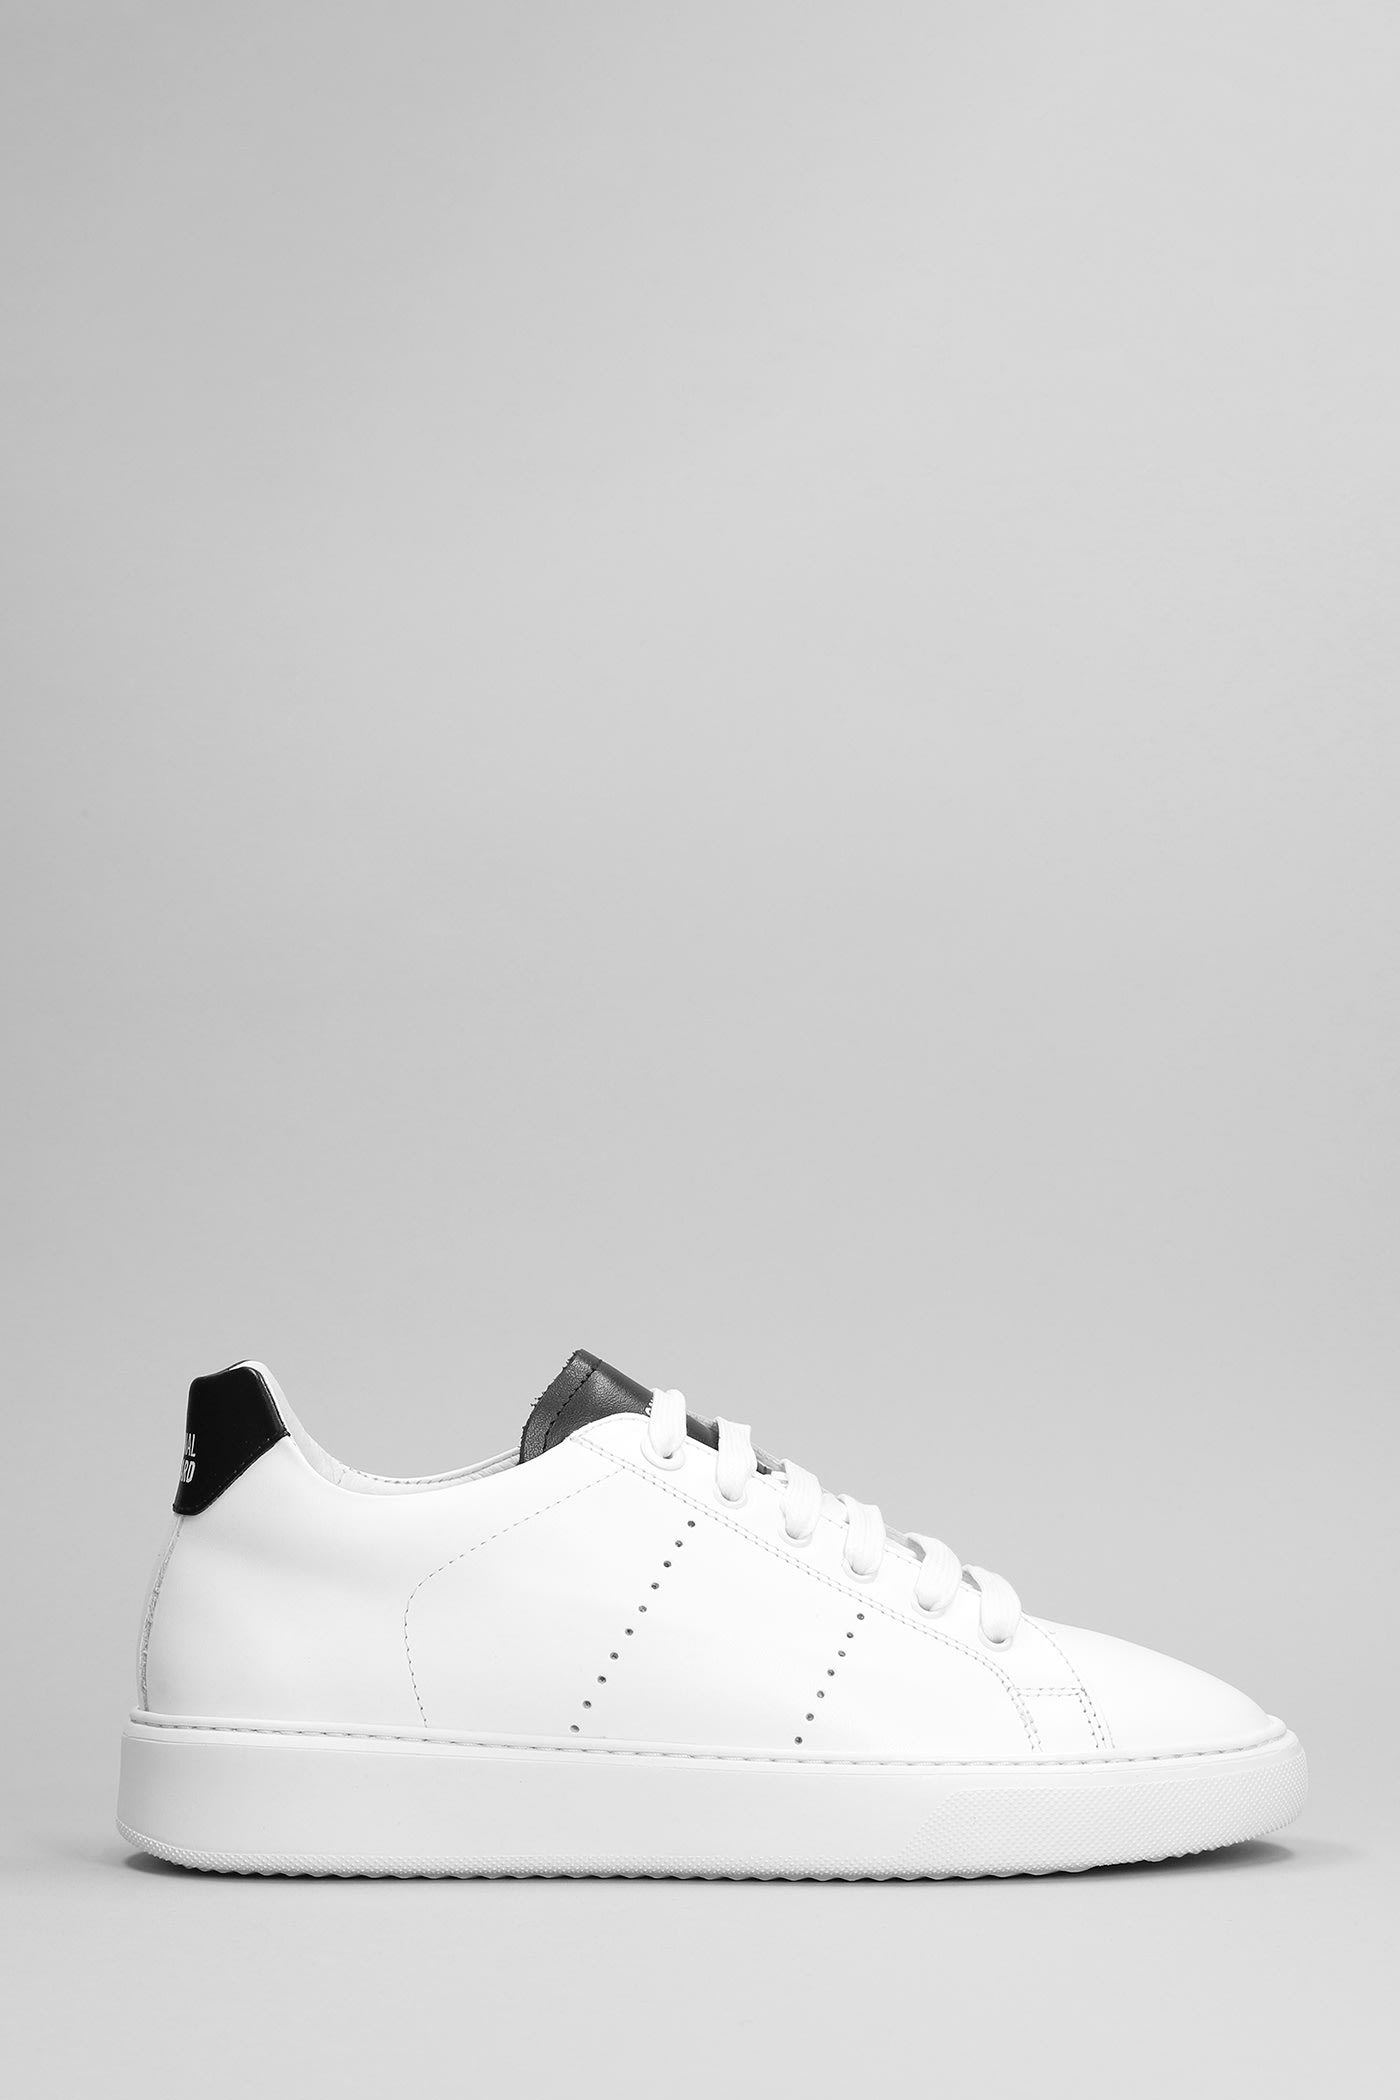 NATIONAL STANDARD EDITION 9 SNEAKERS IN WHITE LEATHER